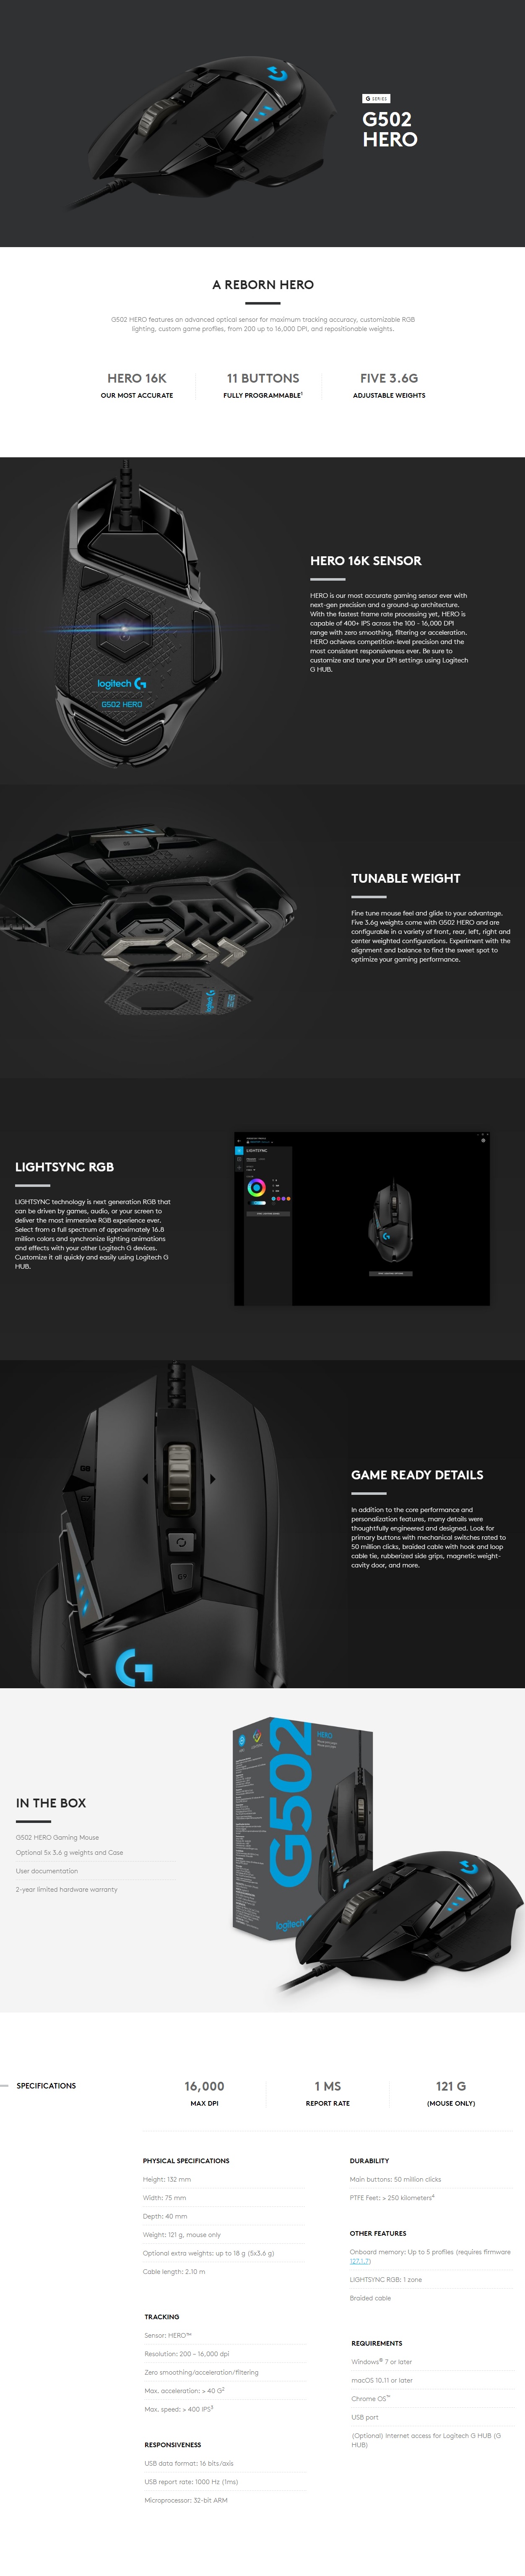  Mouse: G502 HERO PERFORMANCE GAMING MOUSE 100-16,000dpi  